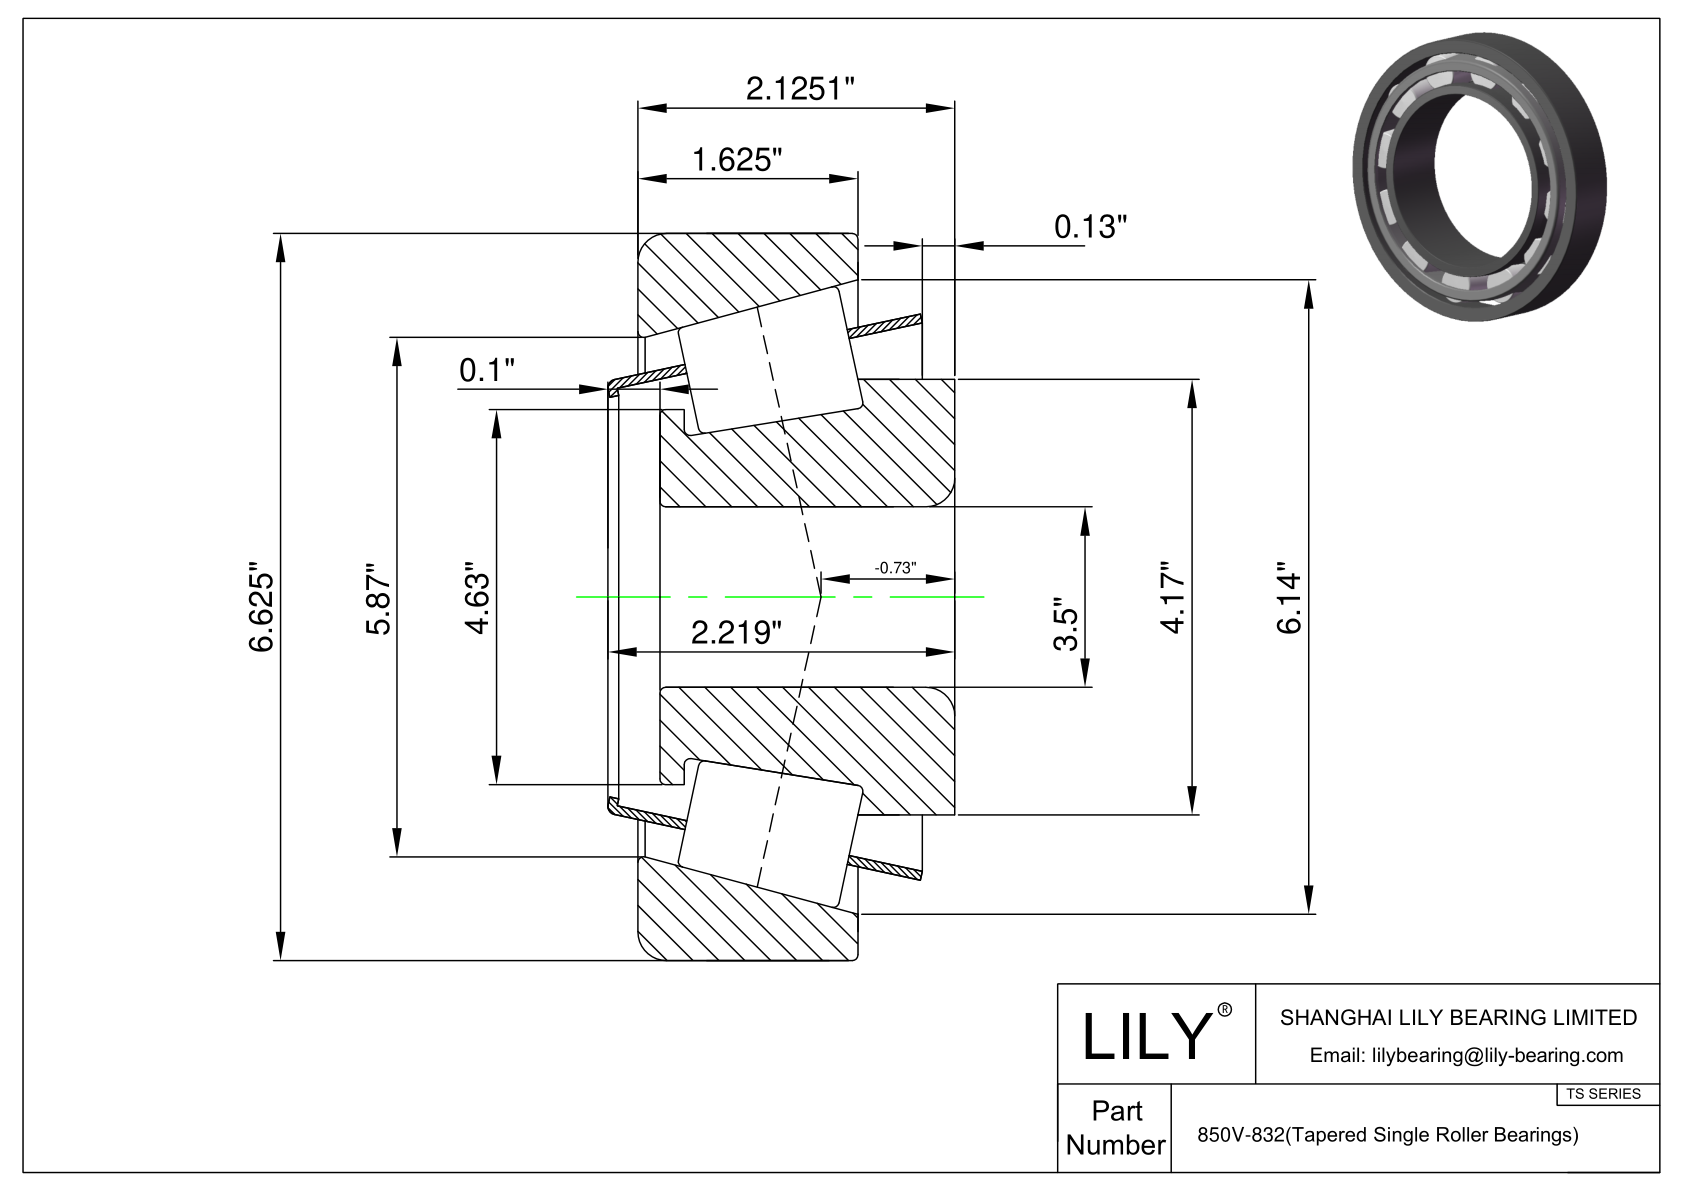 850V-832 TS (Tapered Single Roller Bearings) (Imperial) cad drawing